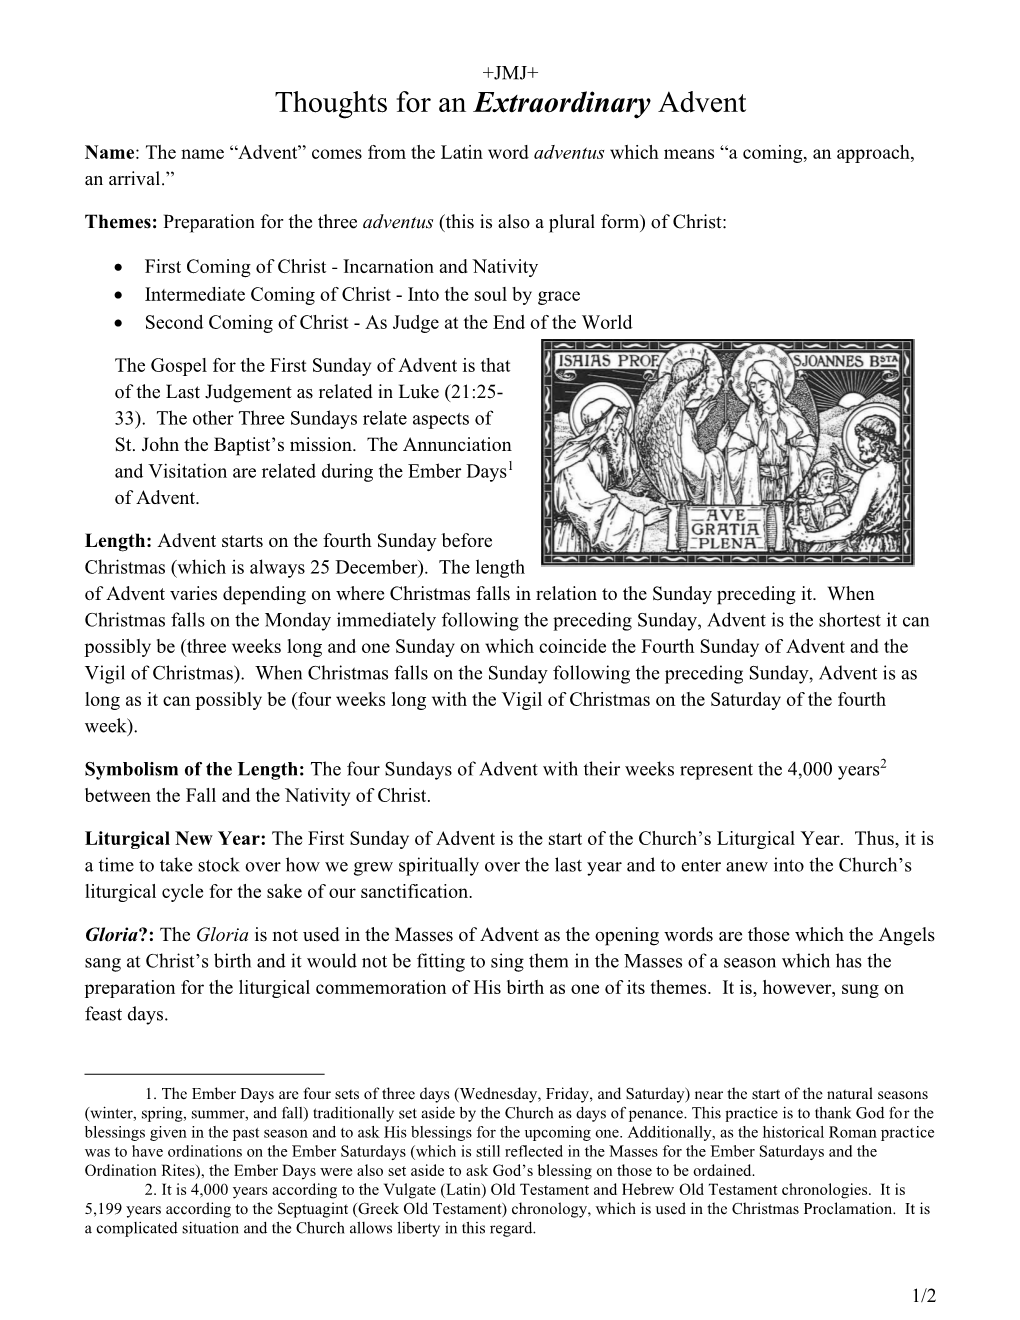 Thoughts for an Extraordinary Advent (PDF)